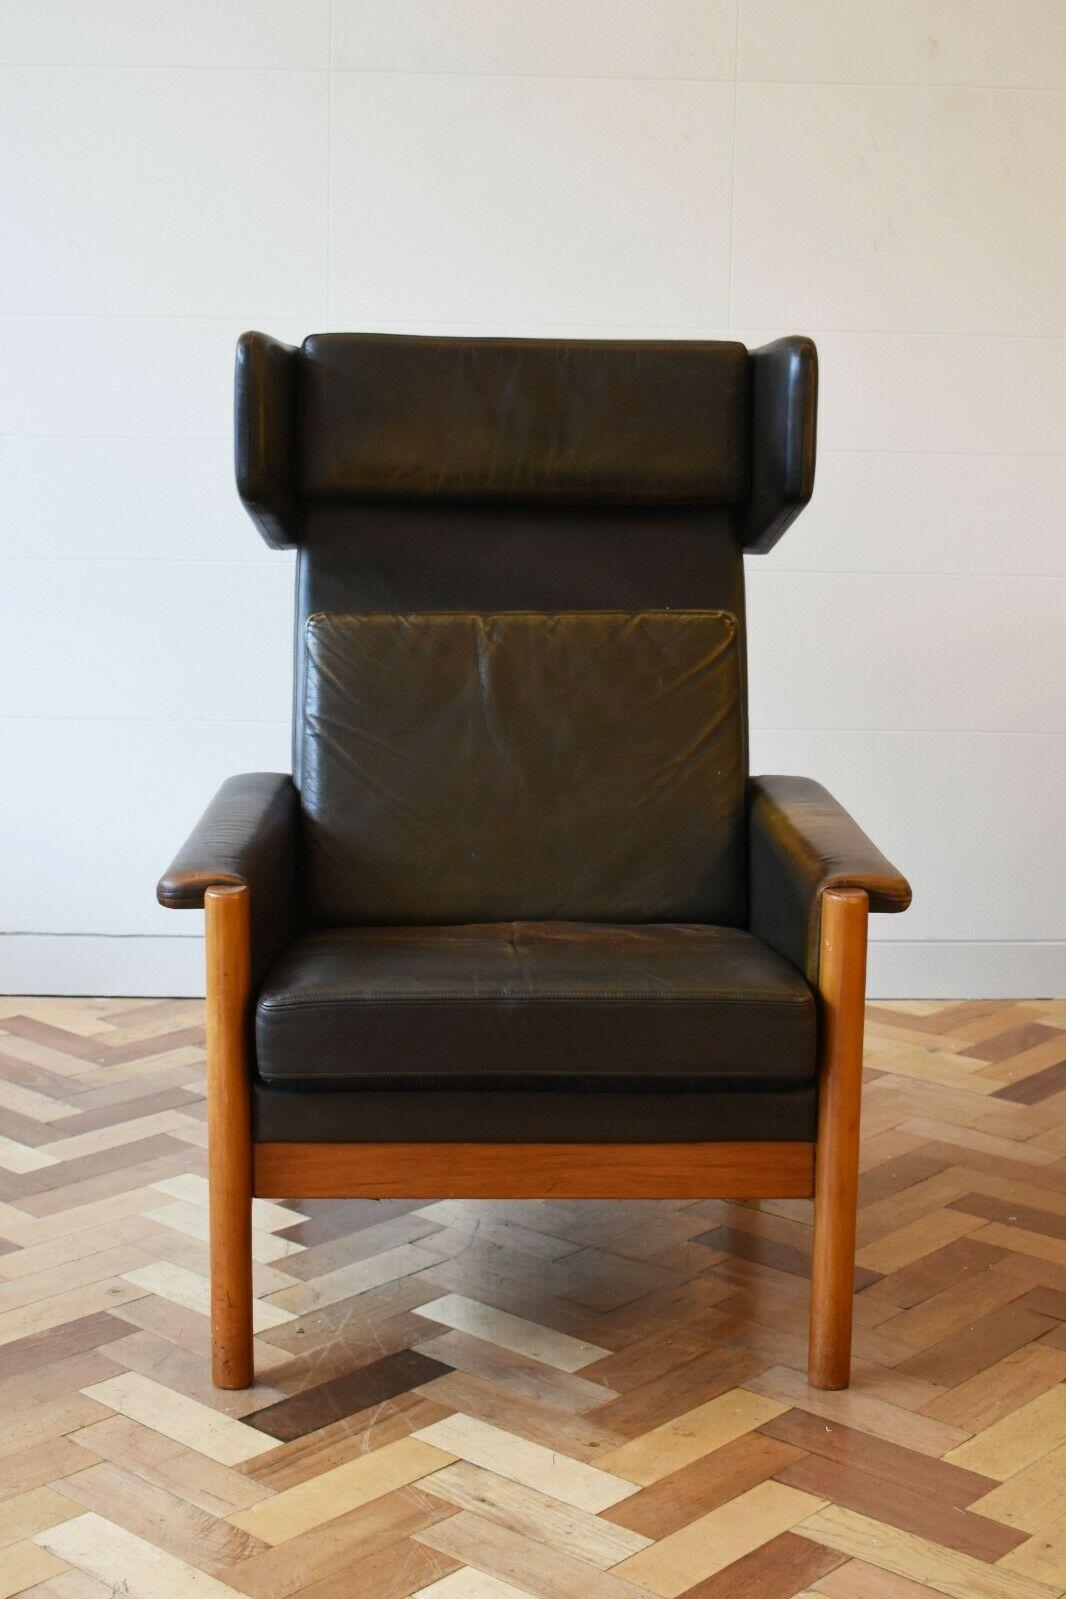 A 1960's Kurt Østervig Model 550 wingback leather armchair for Slagelse Møbelværk. 

This stunning Danish vintage leather wing backed armchair features a teak frame and Upholstered in its original deep green/brown leather, the armchair boasts